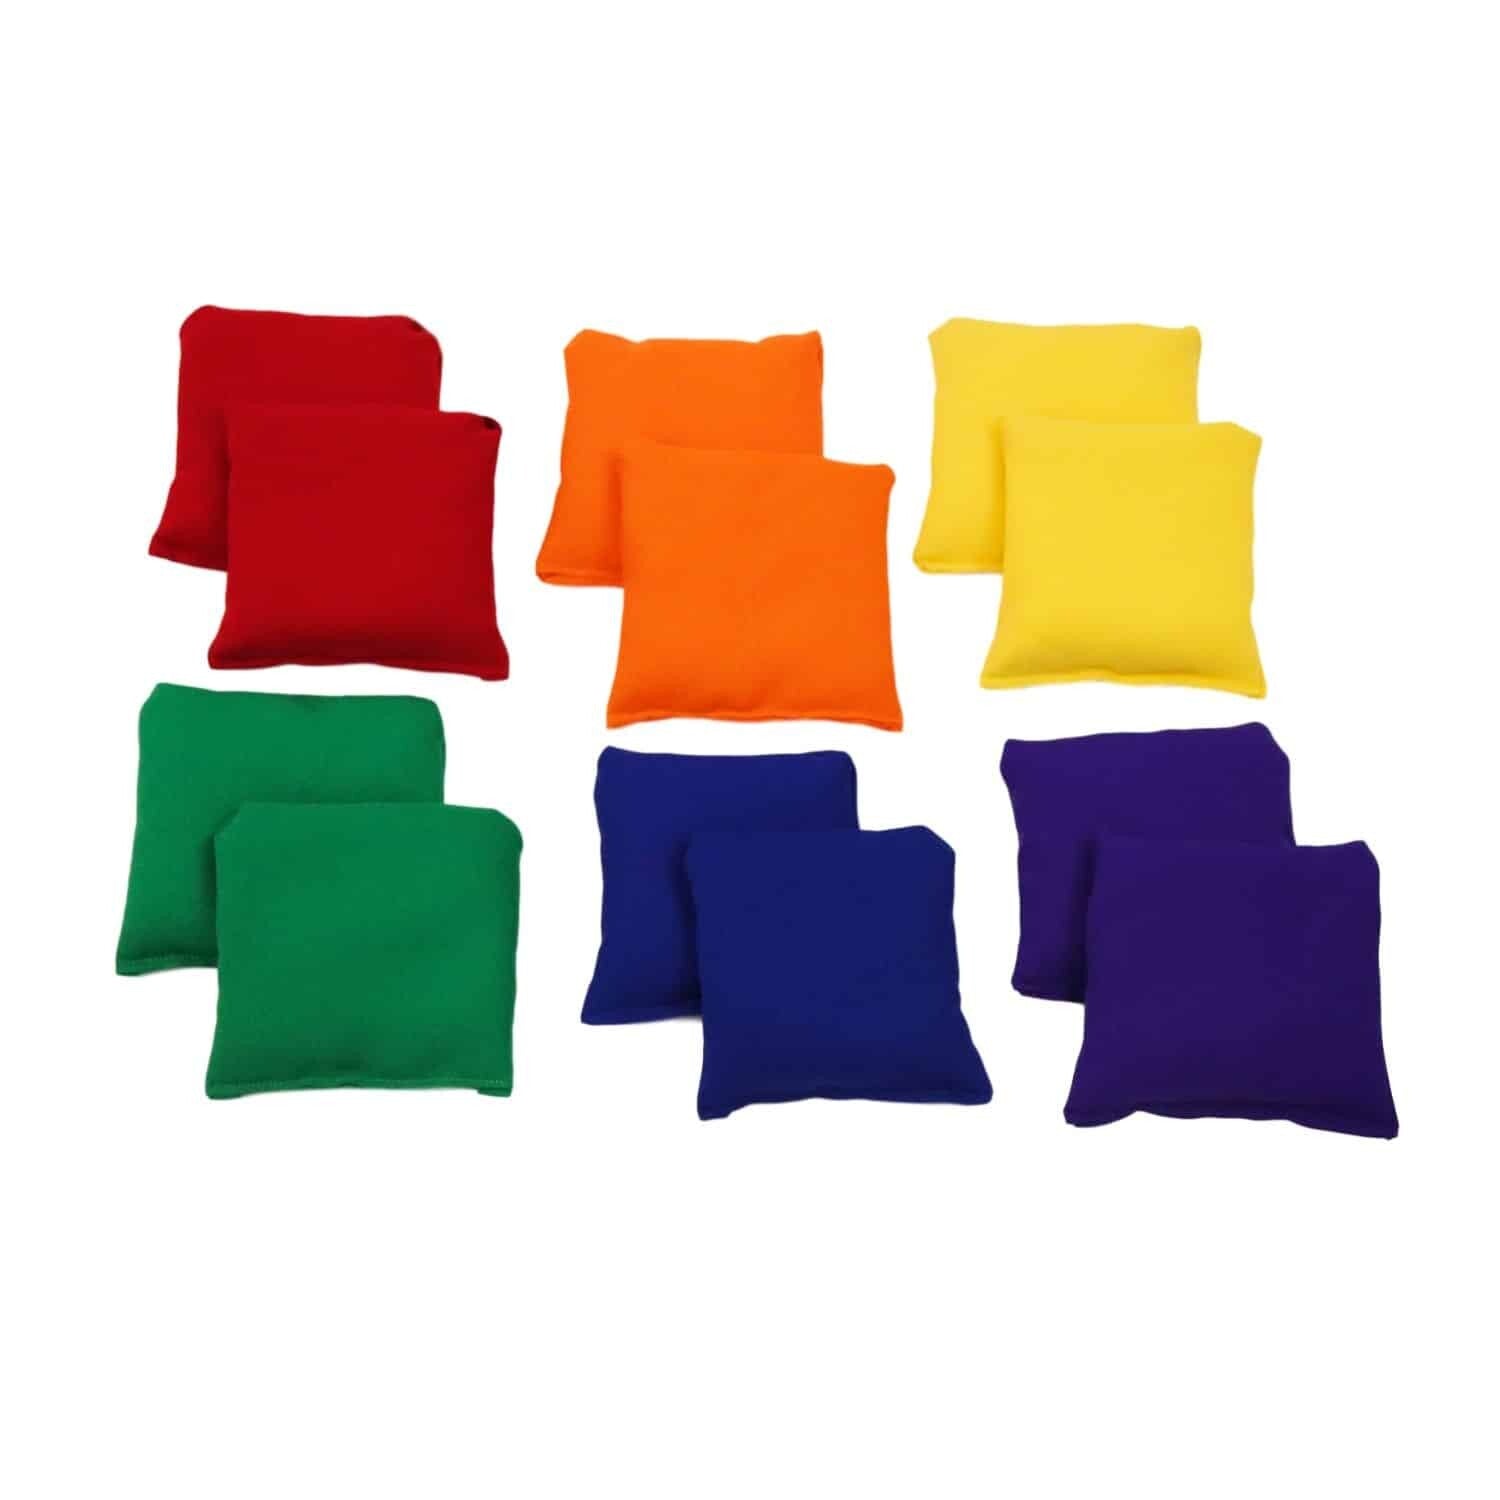 Set of 12 Bean Bags (4 Styles) - Empire Music Co. Ltd-Musical Instrument & Orchestra Accessories-Bear Paw Creek